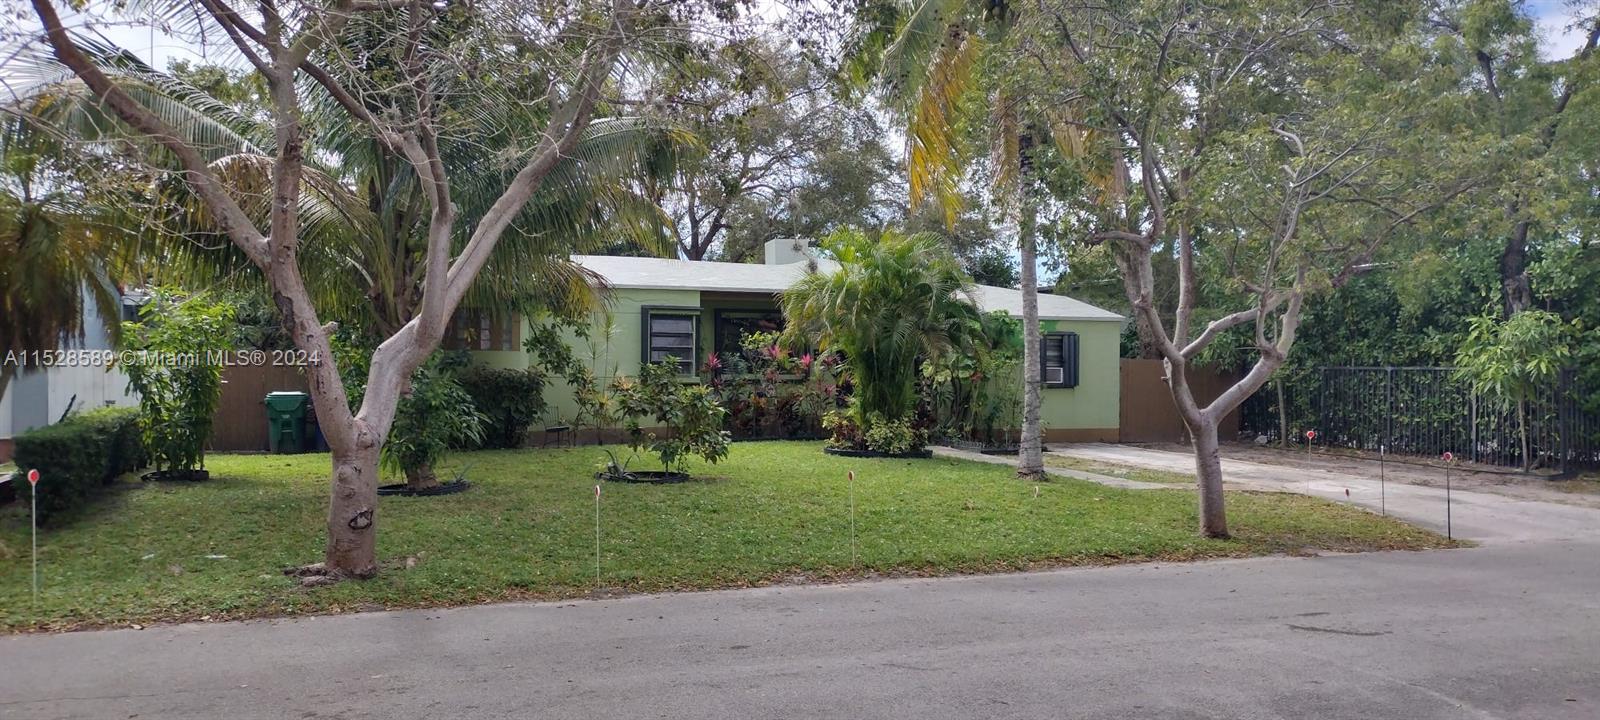 Property for Sale at Address Not Disclosed, Miami, Broward County, Florida - Bedrooms: 2 
Bathrooms: 1  - $1,200,000